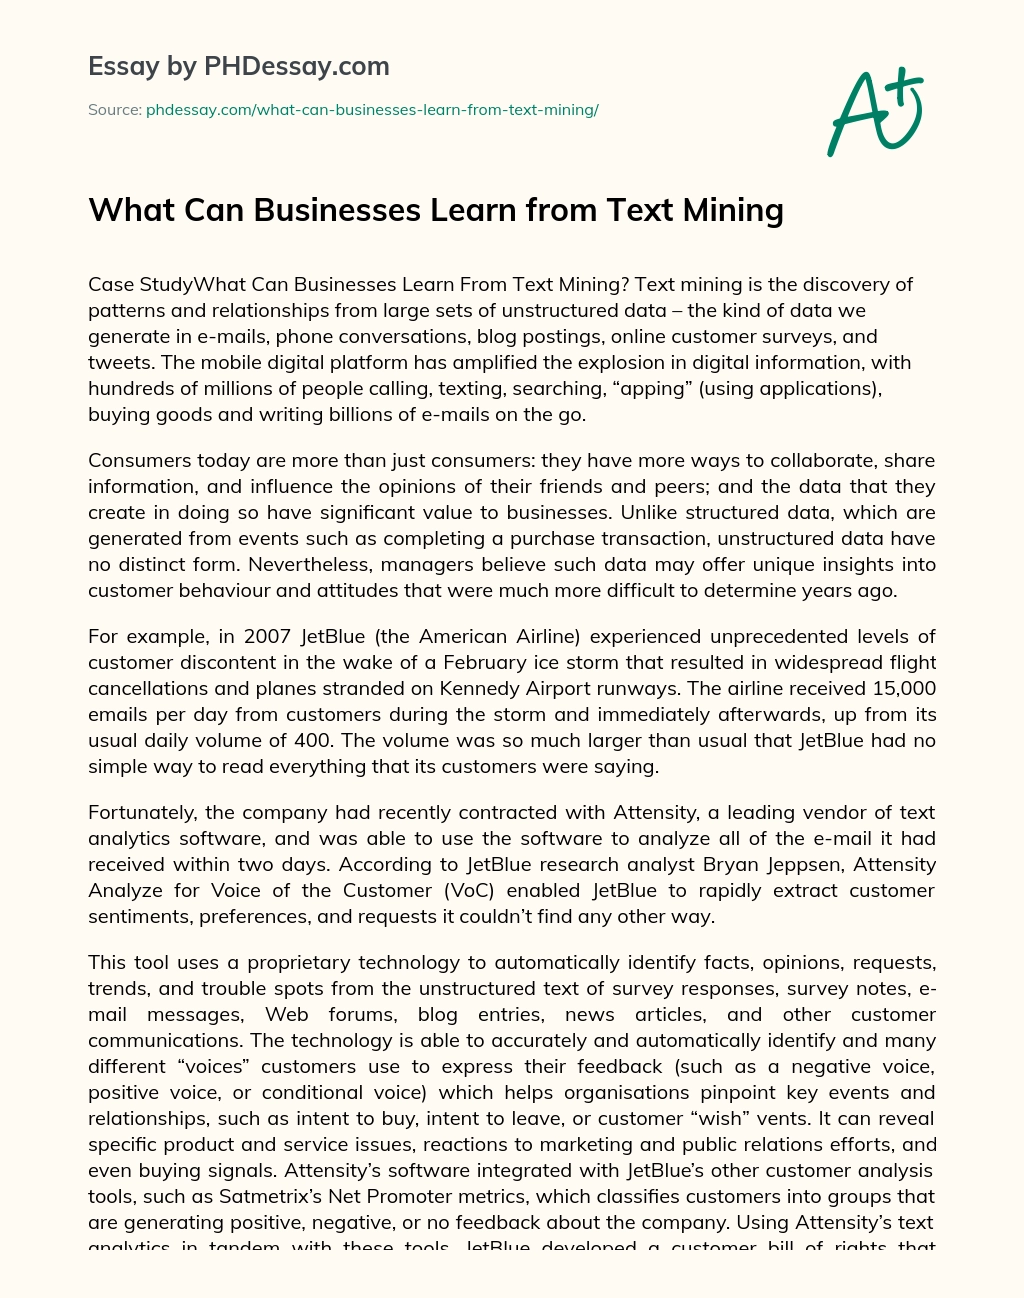 What Can Businesses Learn from Text Mining essay